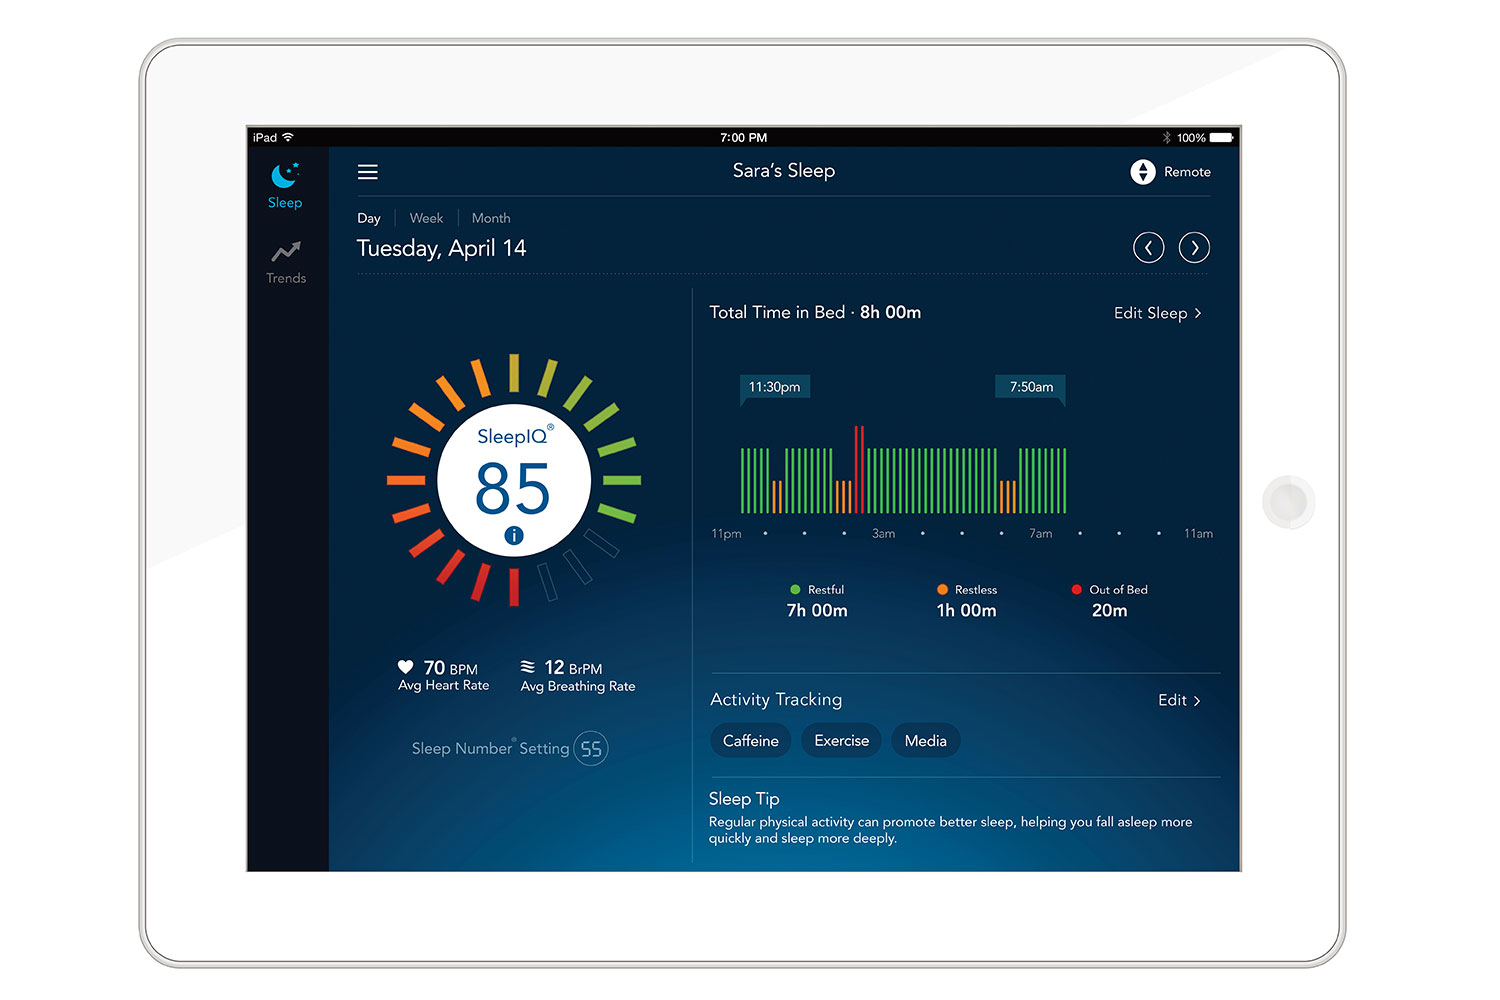 sleep number introduces the it bed at ces 2016 ipad adultdaily 1505 01